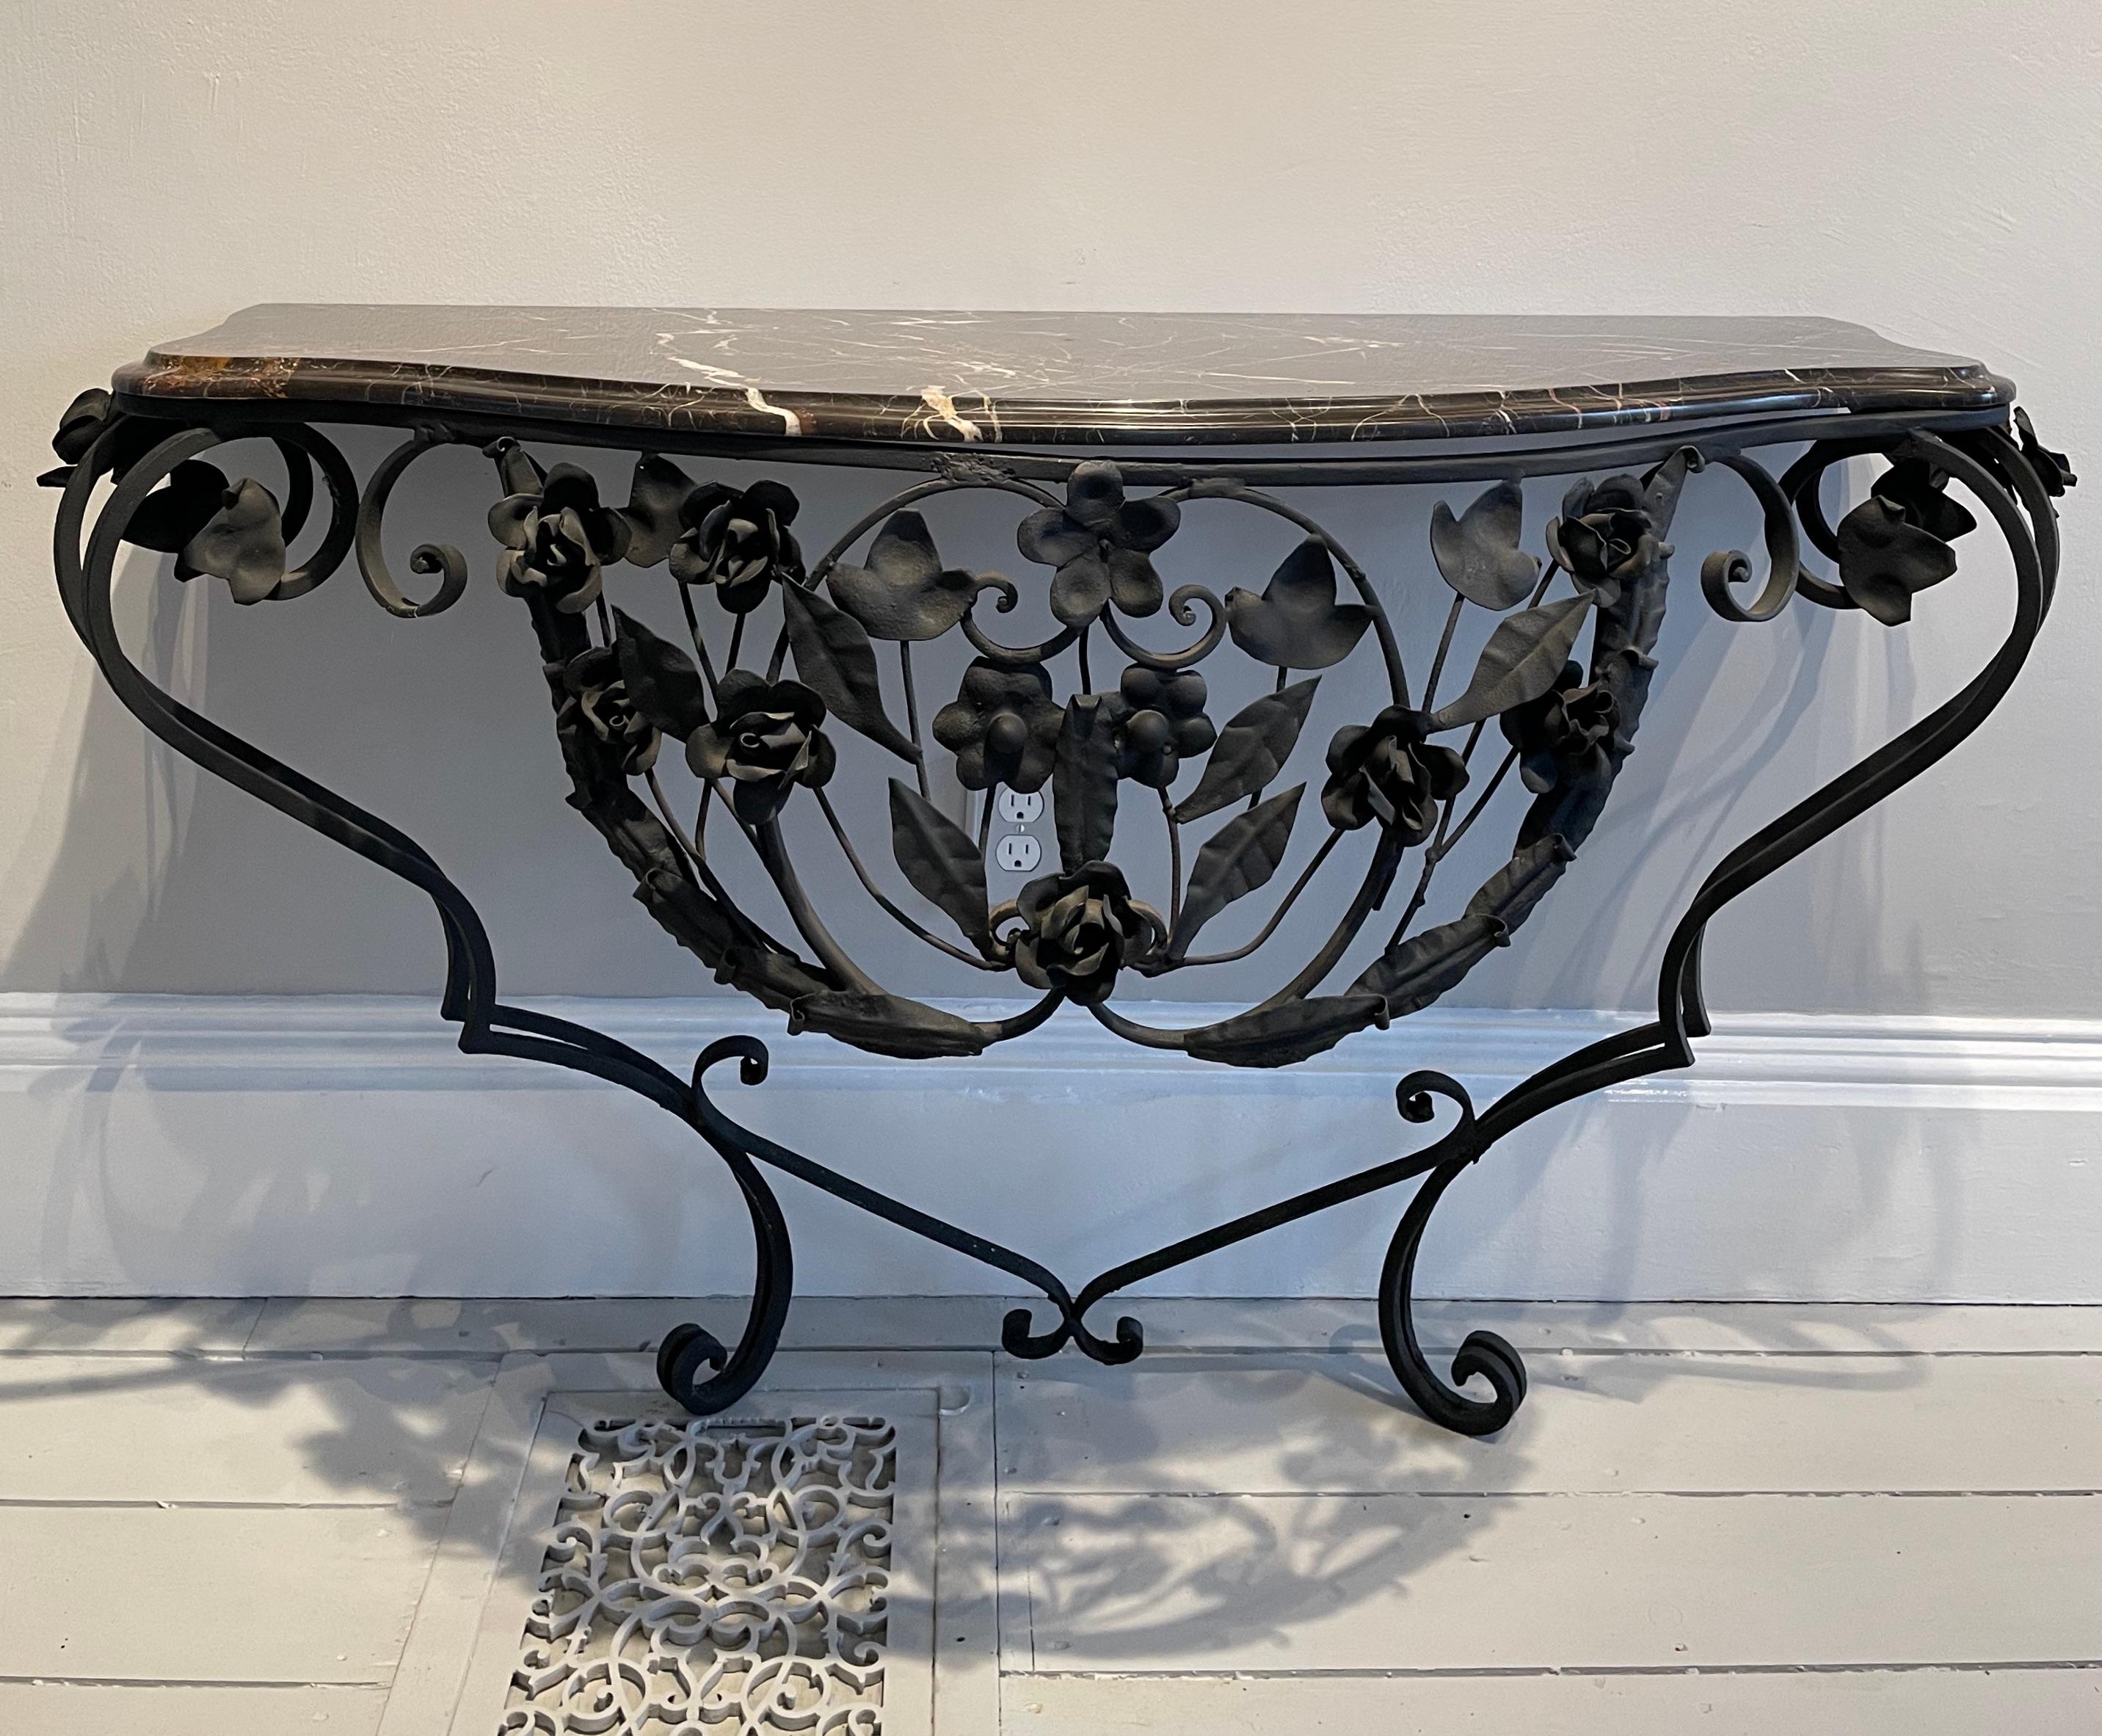 This is a striking console with its bombé form and luscious espresso-colored marble top. In addition, one can raise or lower the height at will, as the table attaches to the wall and bears no weight on the ground. The newer marble top has cream and